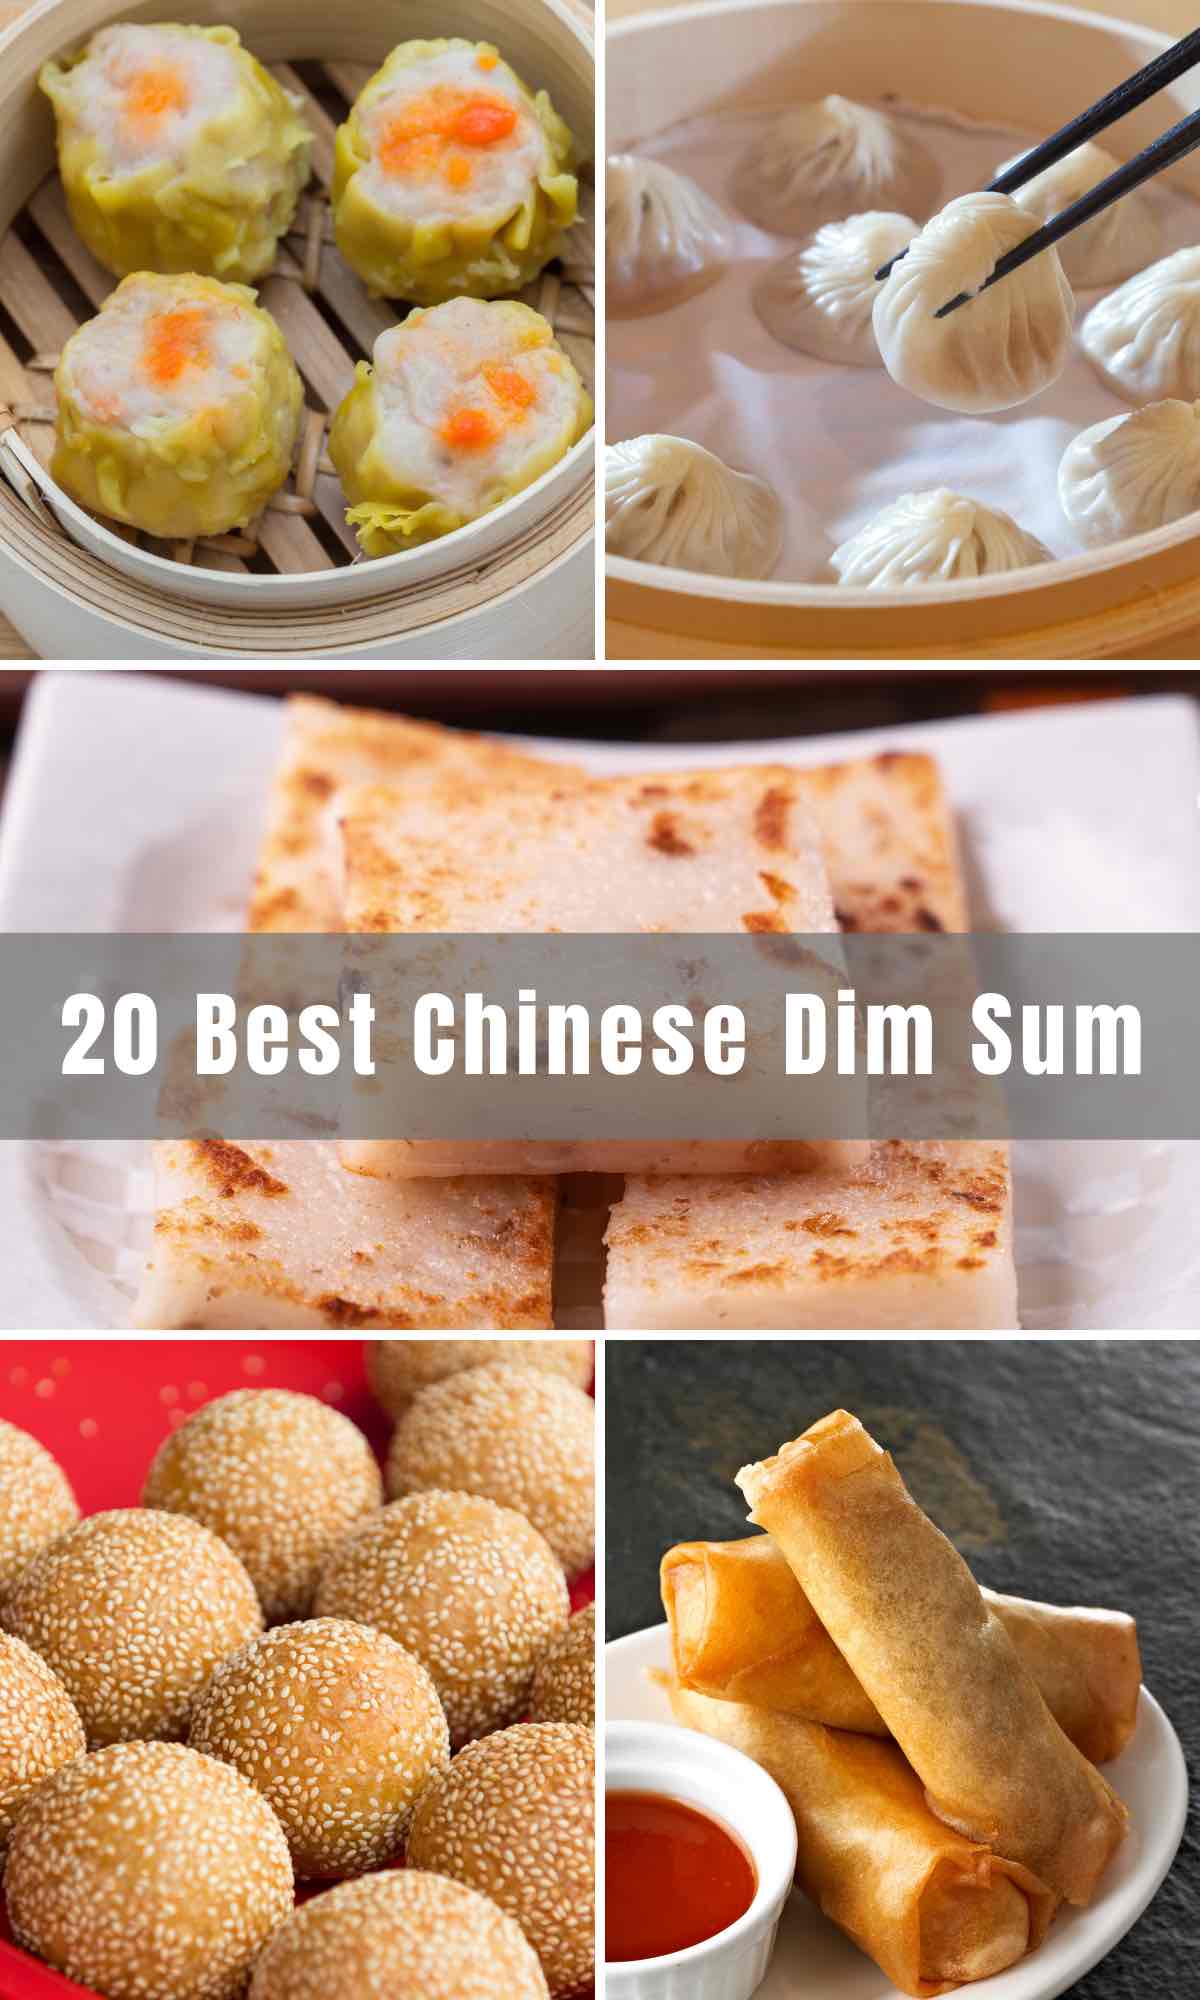 Ever wanted to sample all of your favorite Cantonese appetizers in one sitting? Dim Sum presents a tantalizing array of dumplings, rolls and buns for you to eat to your heart’s content. We’ve rounded up 20 Best Chinese Dim Sum recipes and now you can recreate some of your favorites at home.